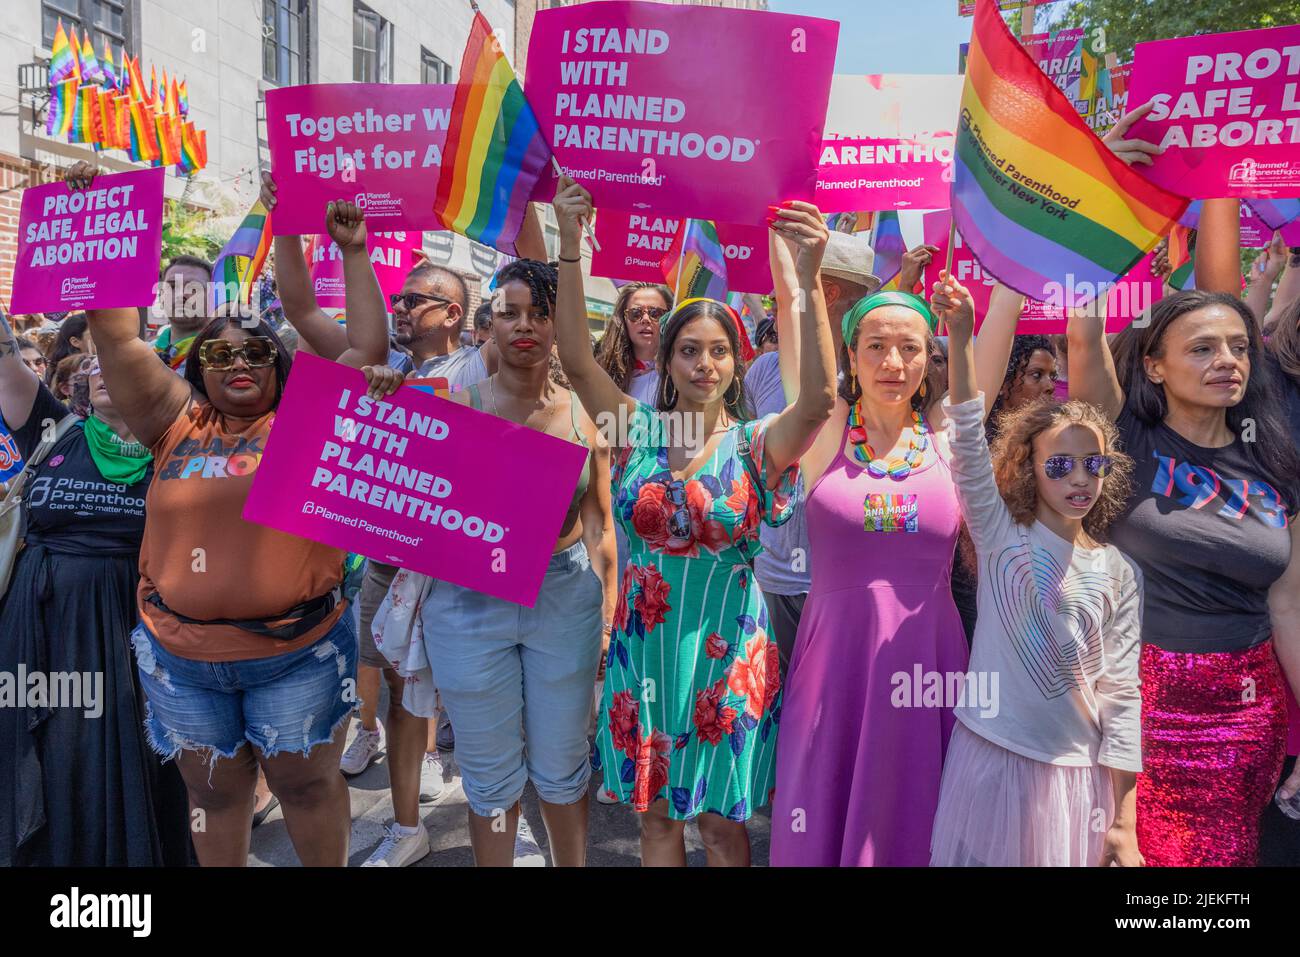 NEW YORK, N.Y. – June 26, 2022: A Planned Parenthood contingent participates in the 2022 NYC Pride March. Stock Photo